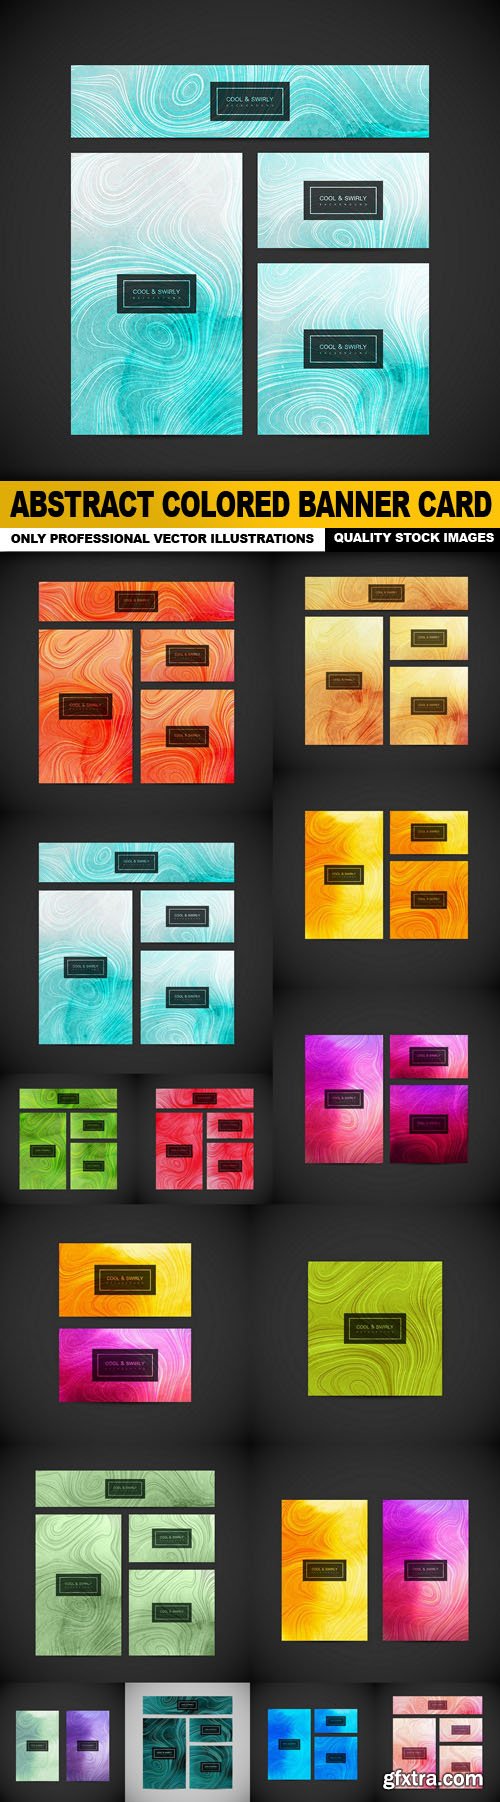 Abstract Colored Banner Card - 15 VEctor